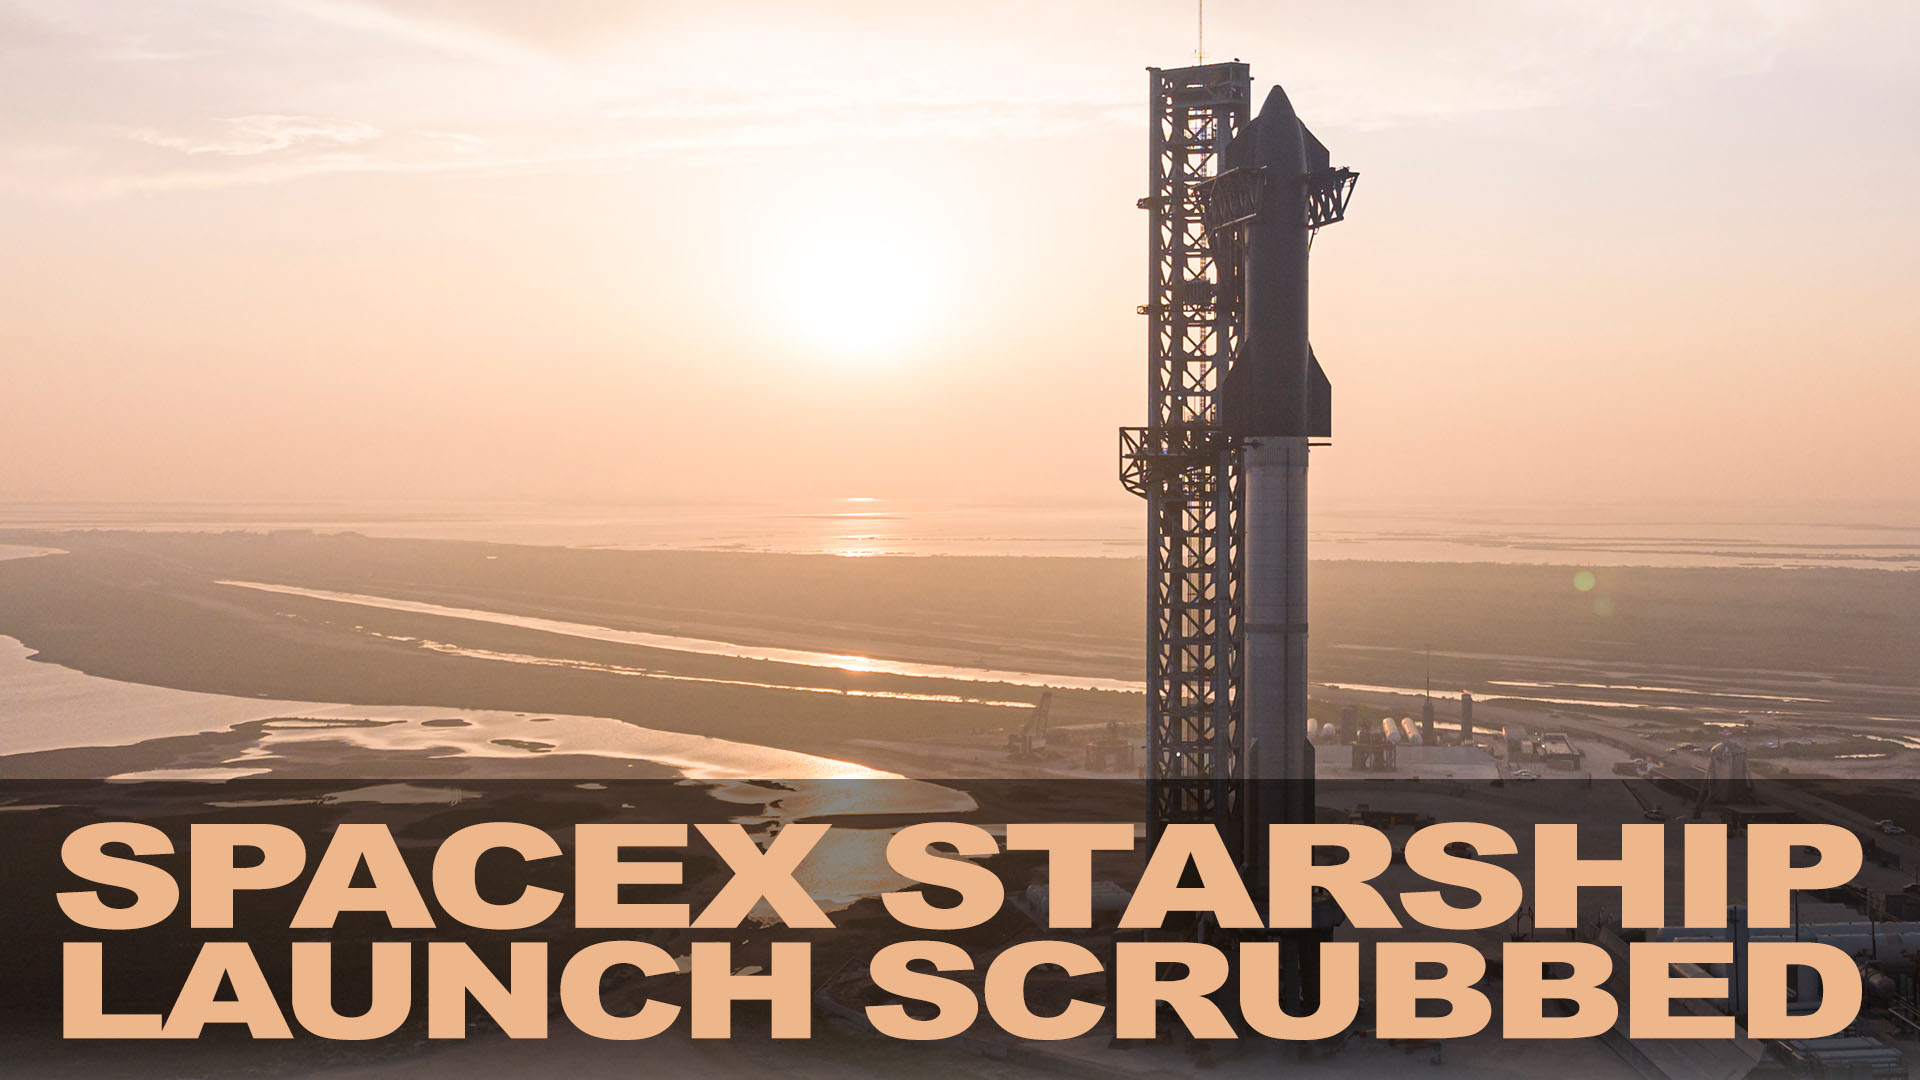 First Full Stack Starship Launch Scrubbed